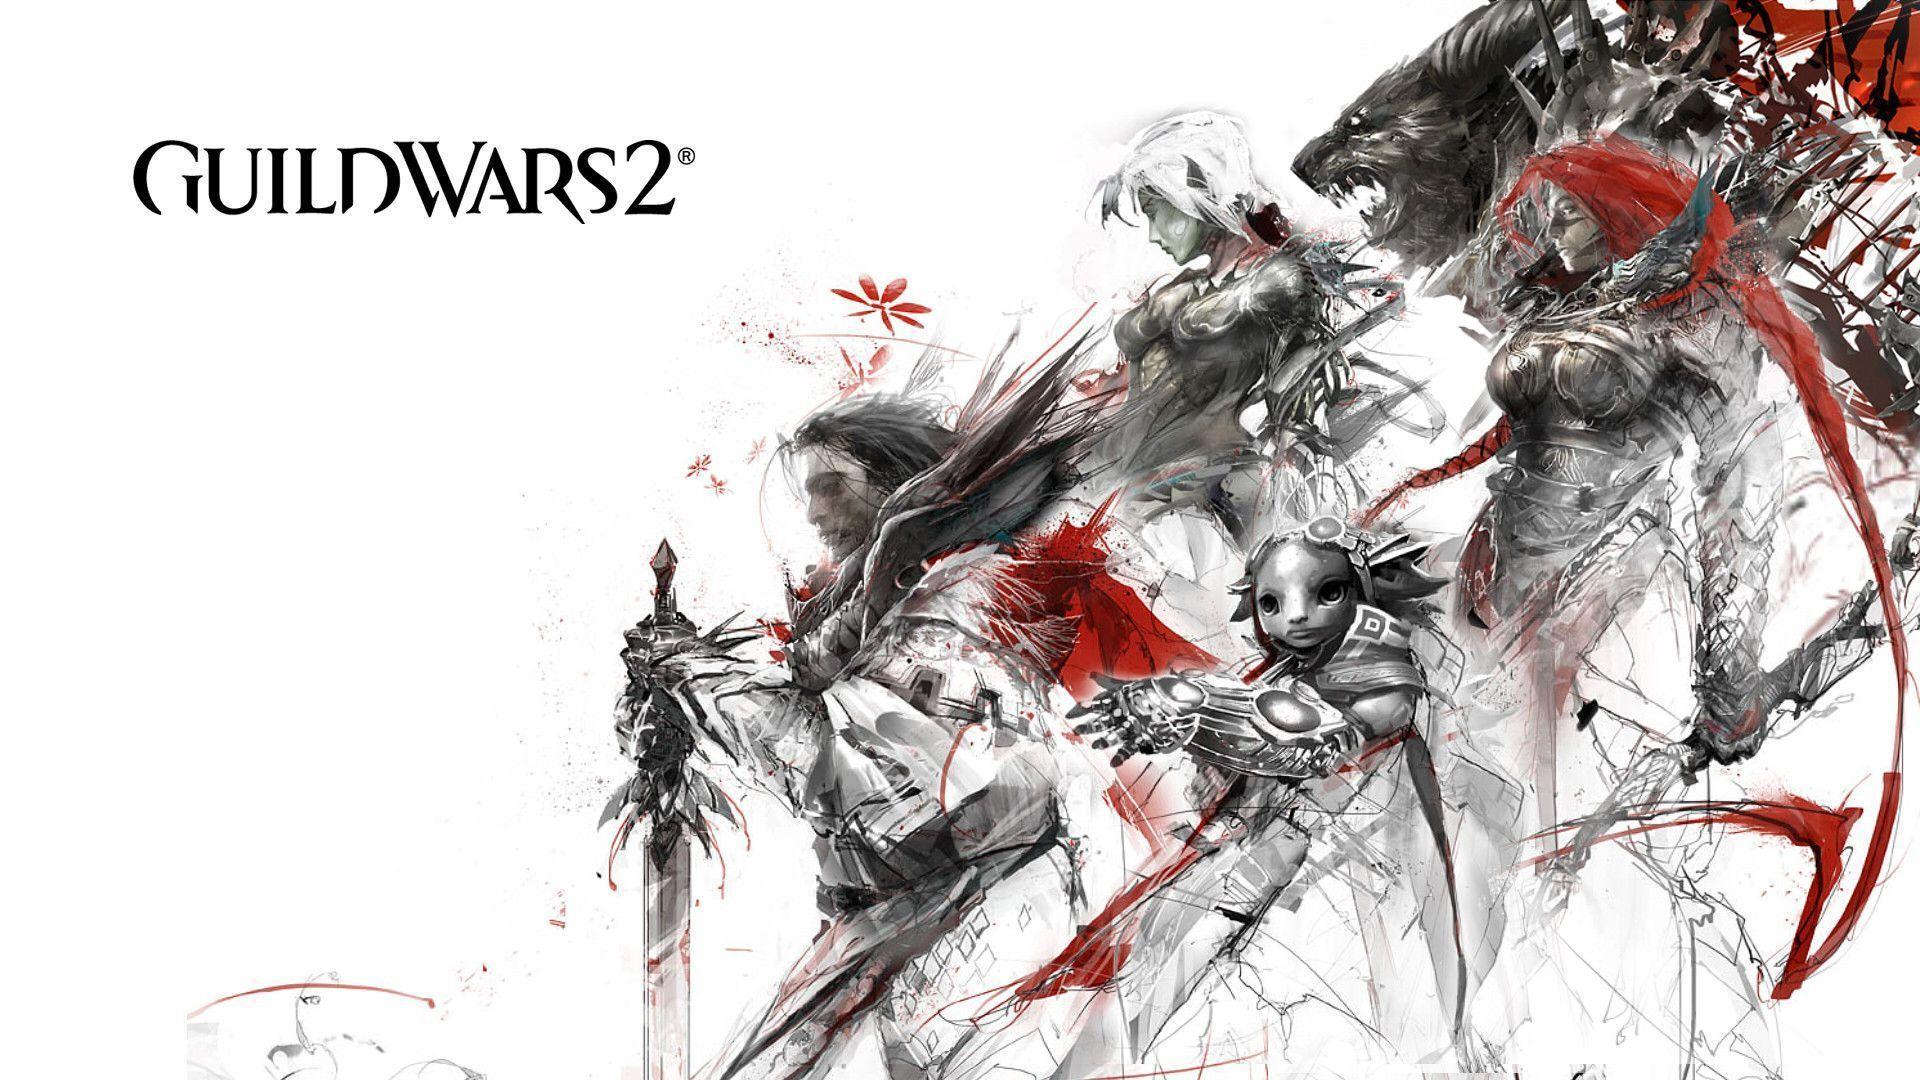 Video Game Guild Wars 2 Wallpaper 1920x1080 px Free Download